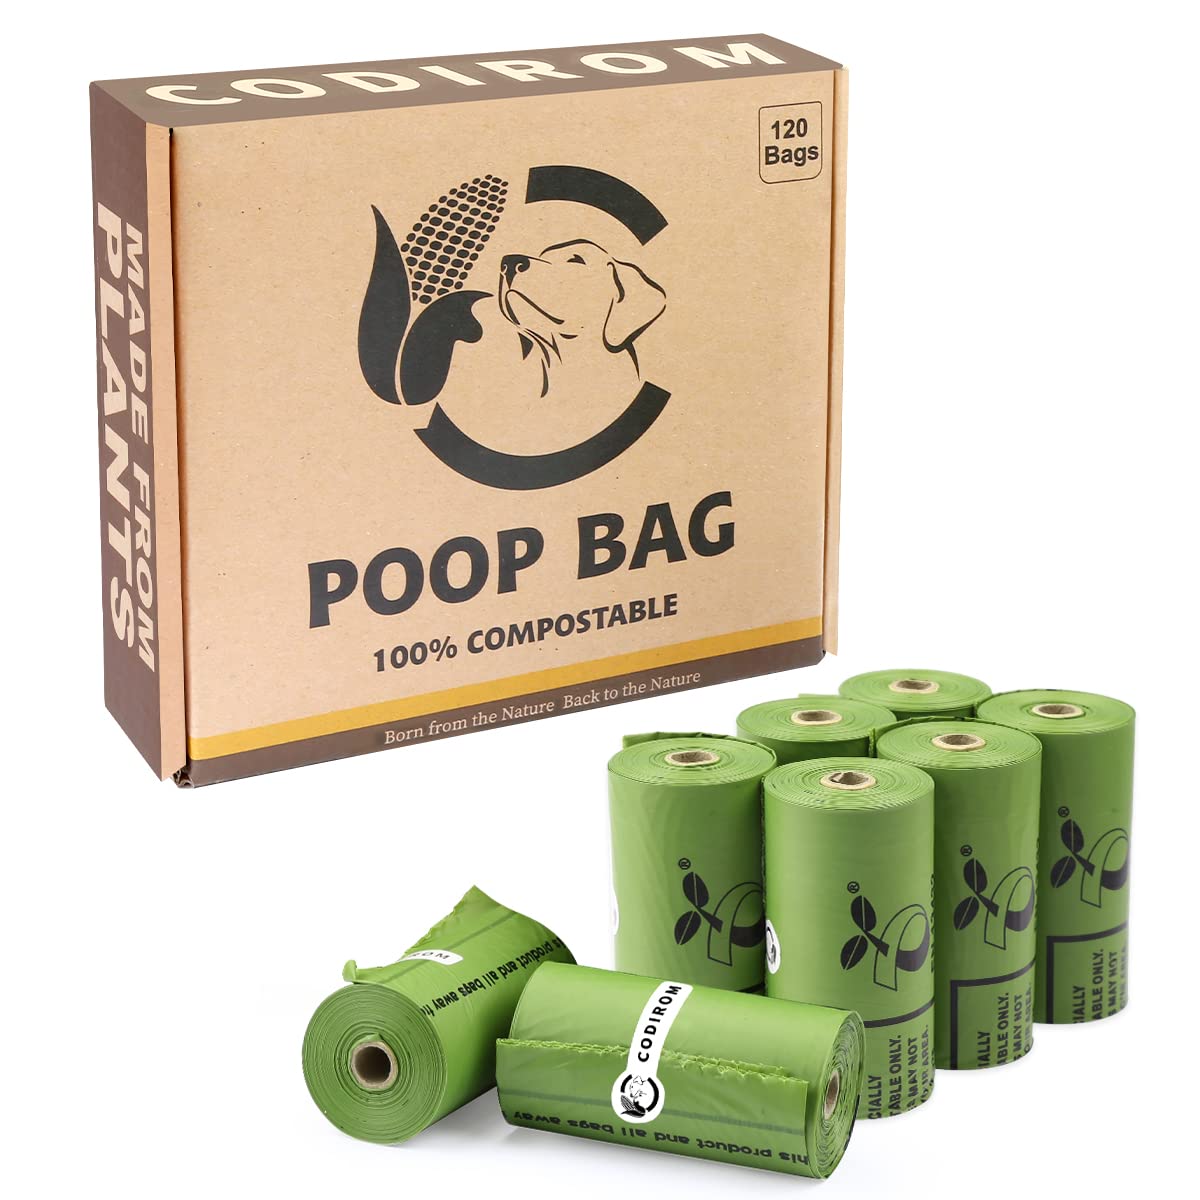 Certified Compostable Poop Bag, 120 Count Forest Green, 15 Doggy Bags Per Roll (8 rolls)